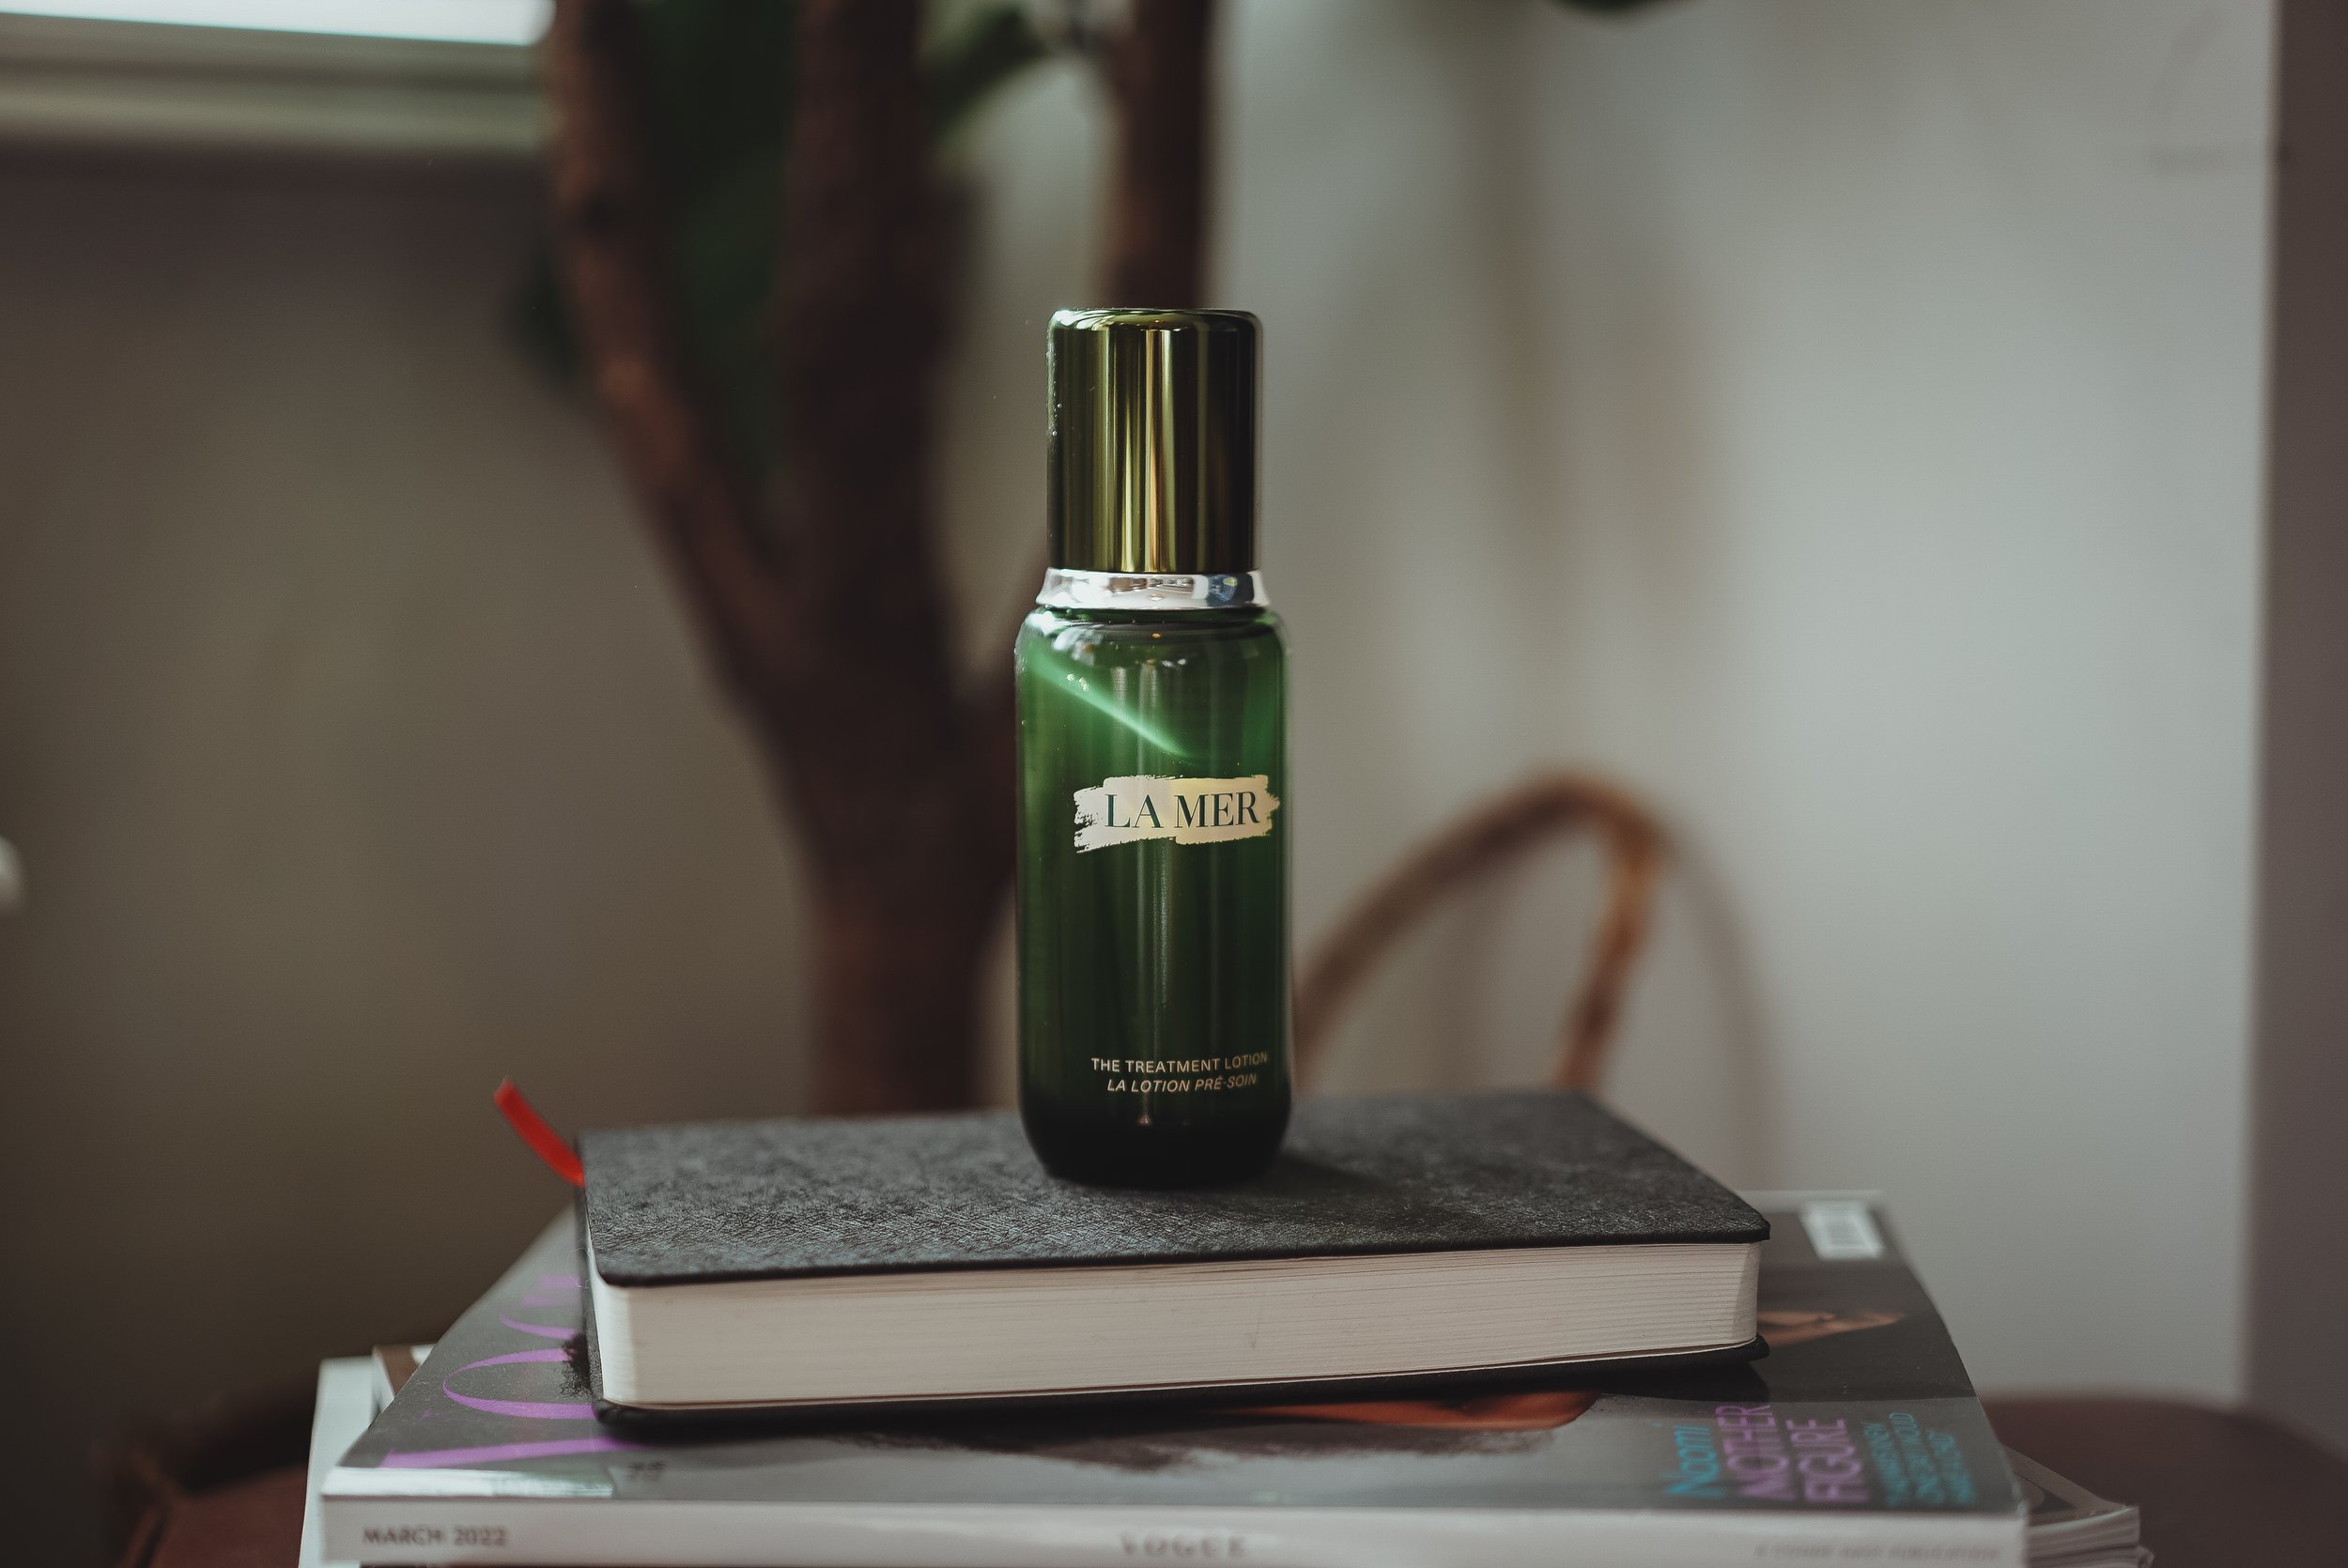 La Mer Launches Its Newly Reformulated Advanced Treatment Lotion